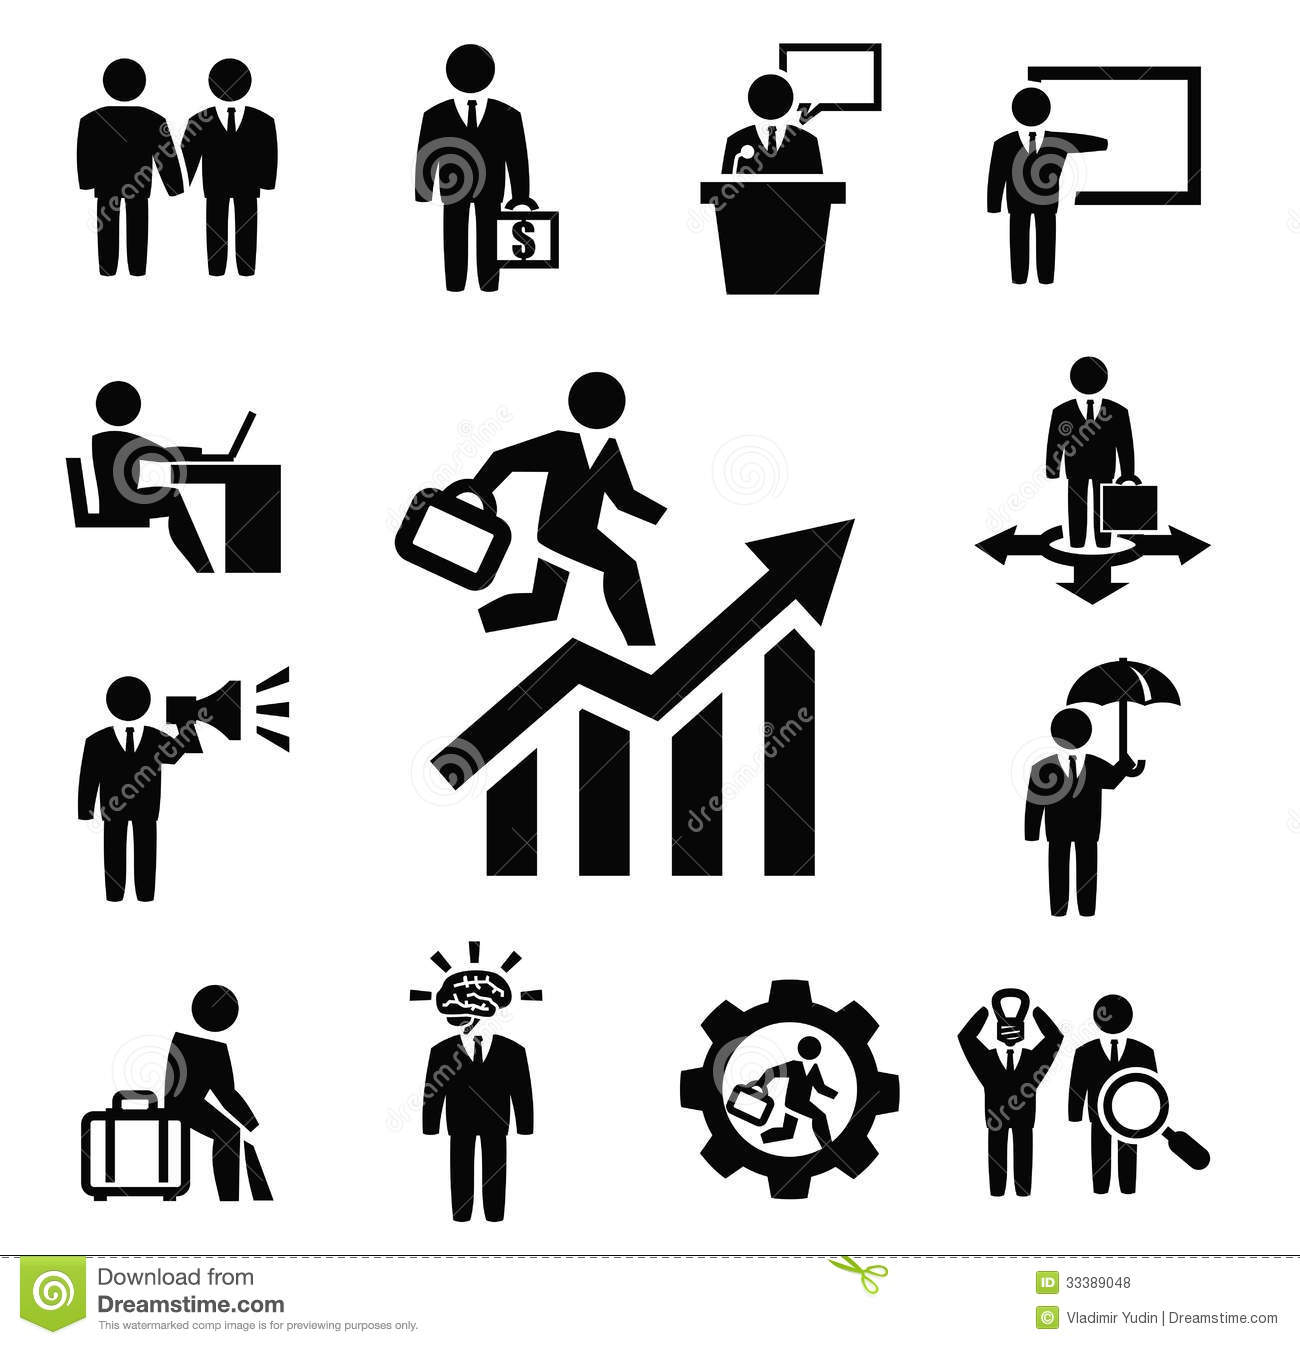 Black and White Business People Icons